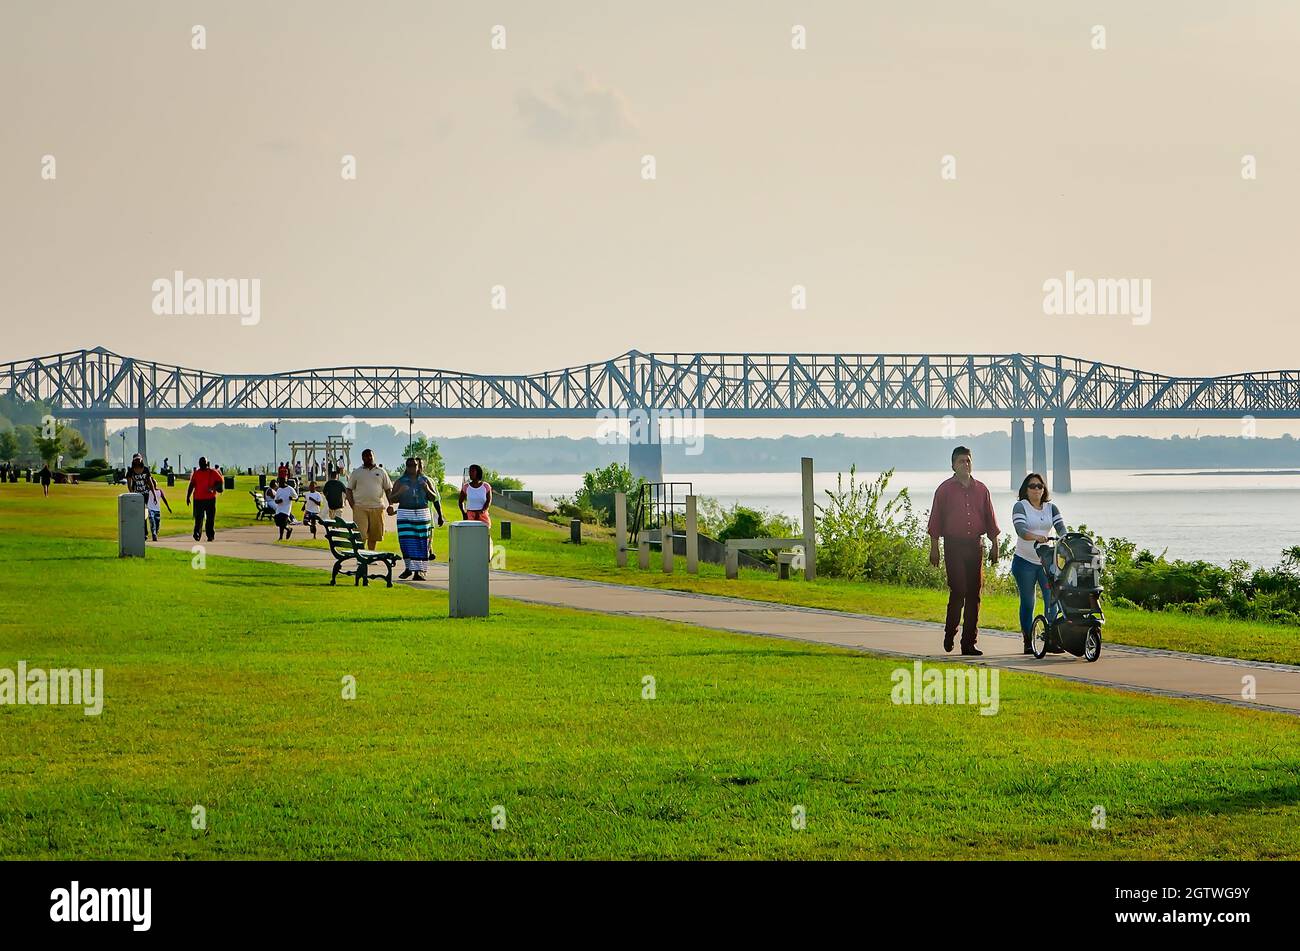 People walk in Tom Lee Park, Sept. 6, 2015, in Memphis, Tennessee. Tom Lee Park is a 30-acre city park west of the city of Memphis. Stock Photo